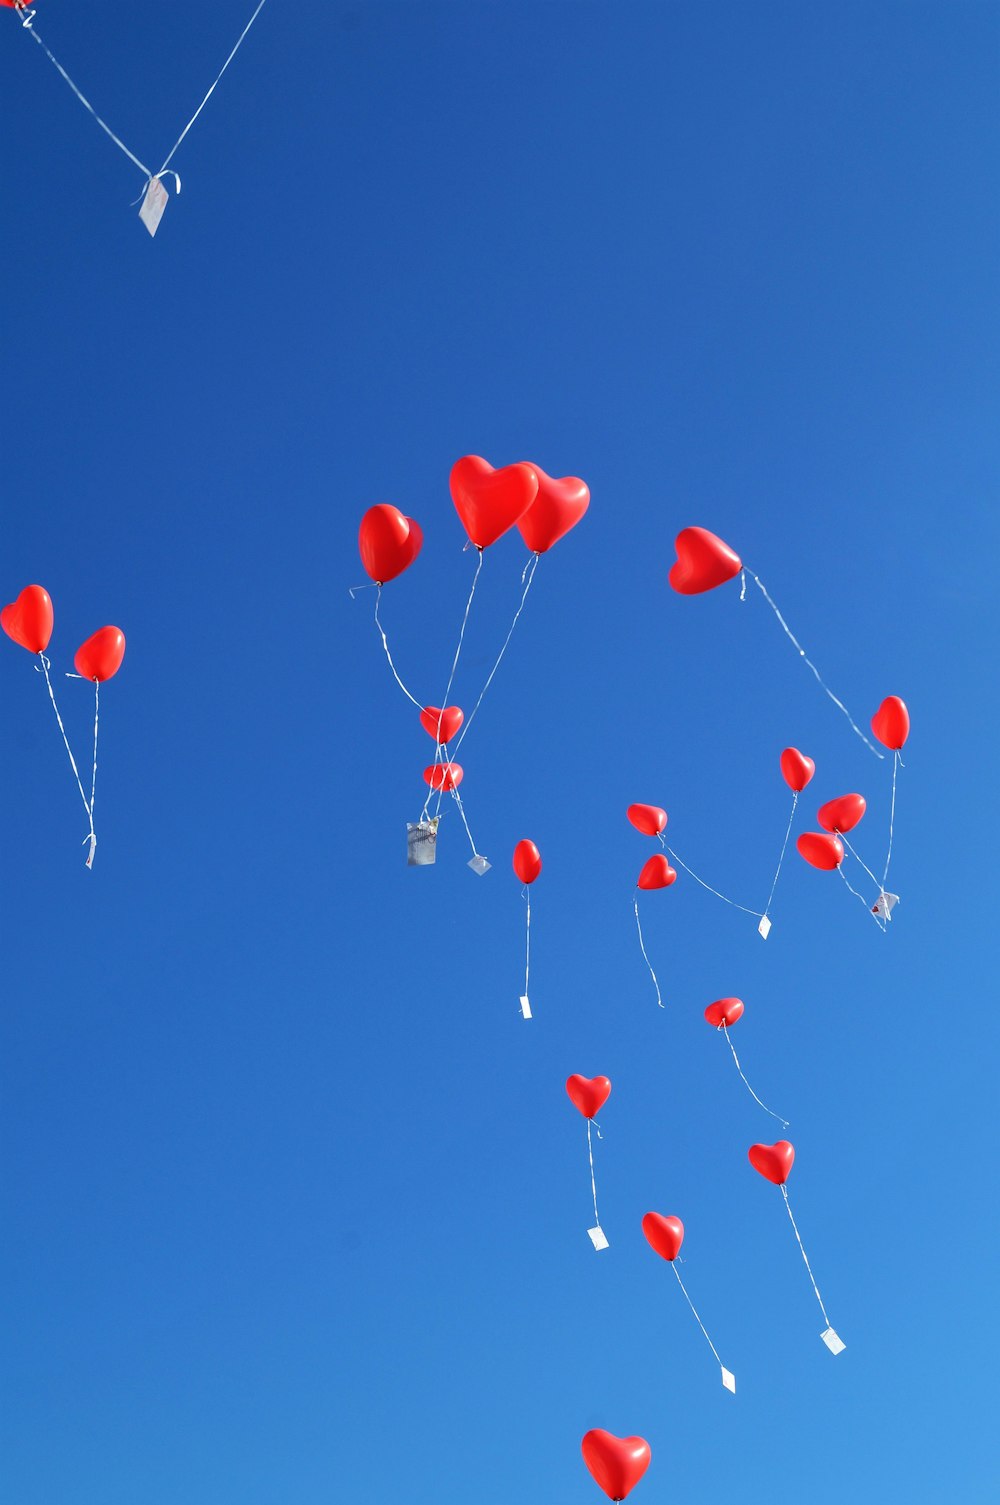 red balloons on blue sky during daytime